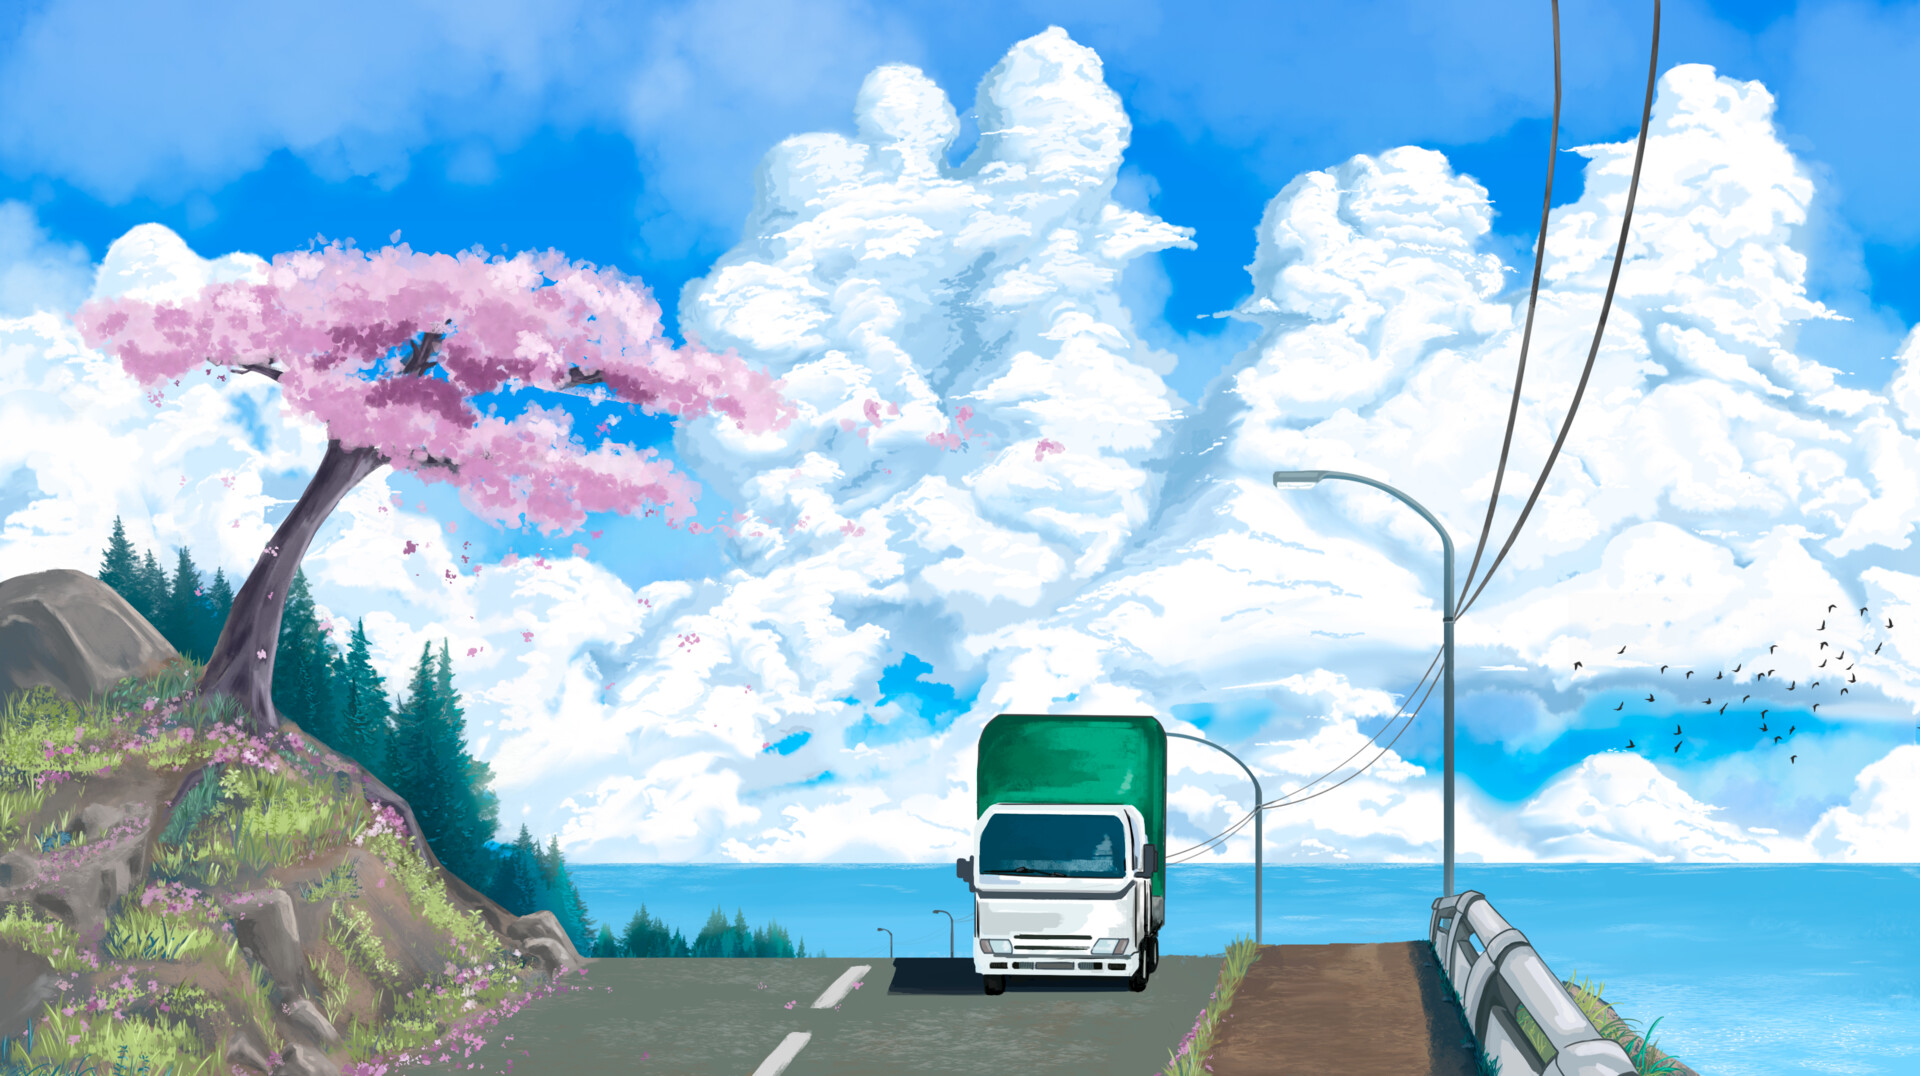 The Road! - Anime scenery Wallpapers and Images - Desktop Nexus Groups